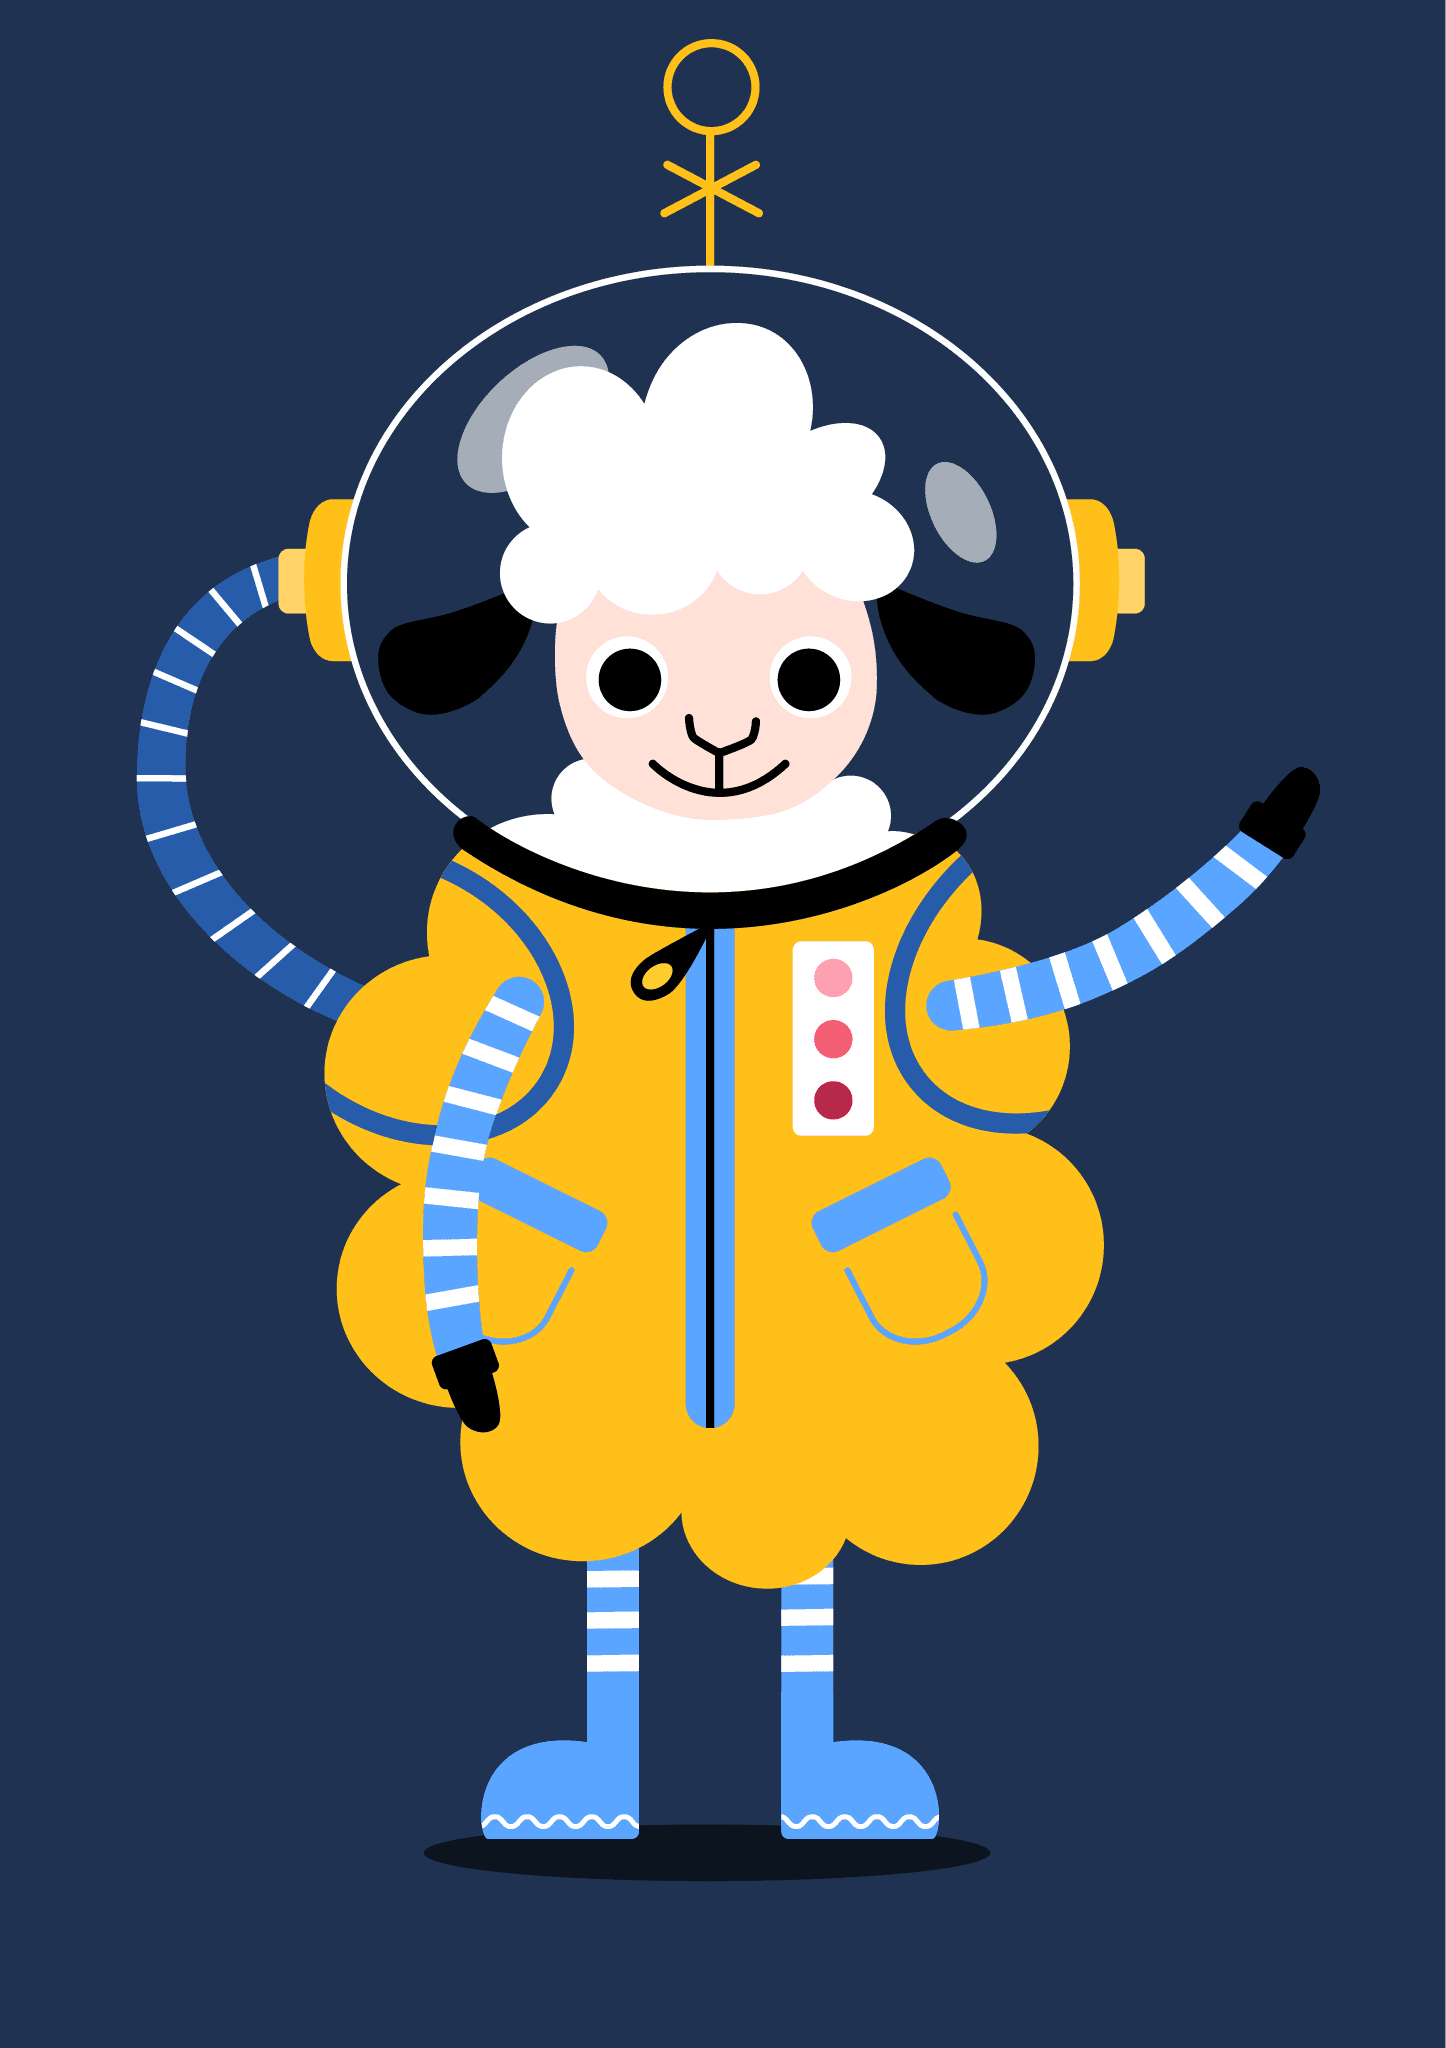 Vector illustration of Lolli, a smiley young white sheep, wearing a yellow and blue astronaut suit.